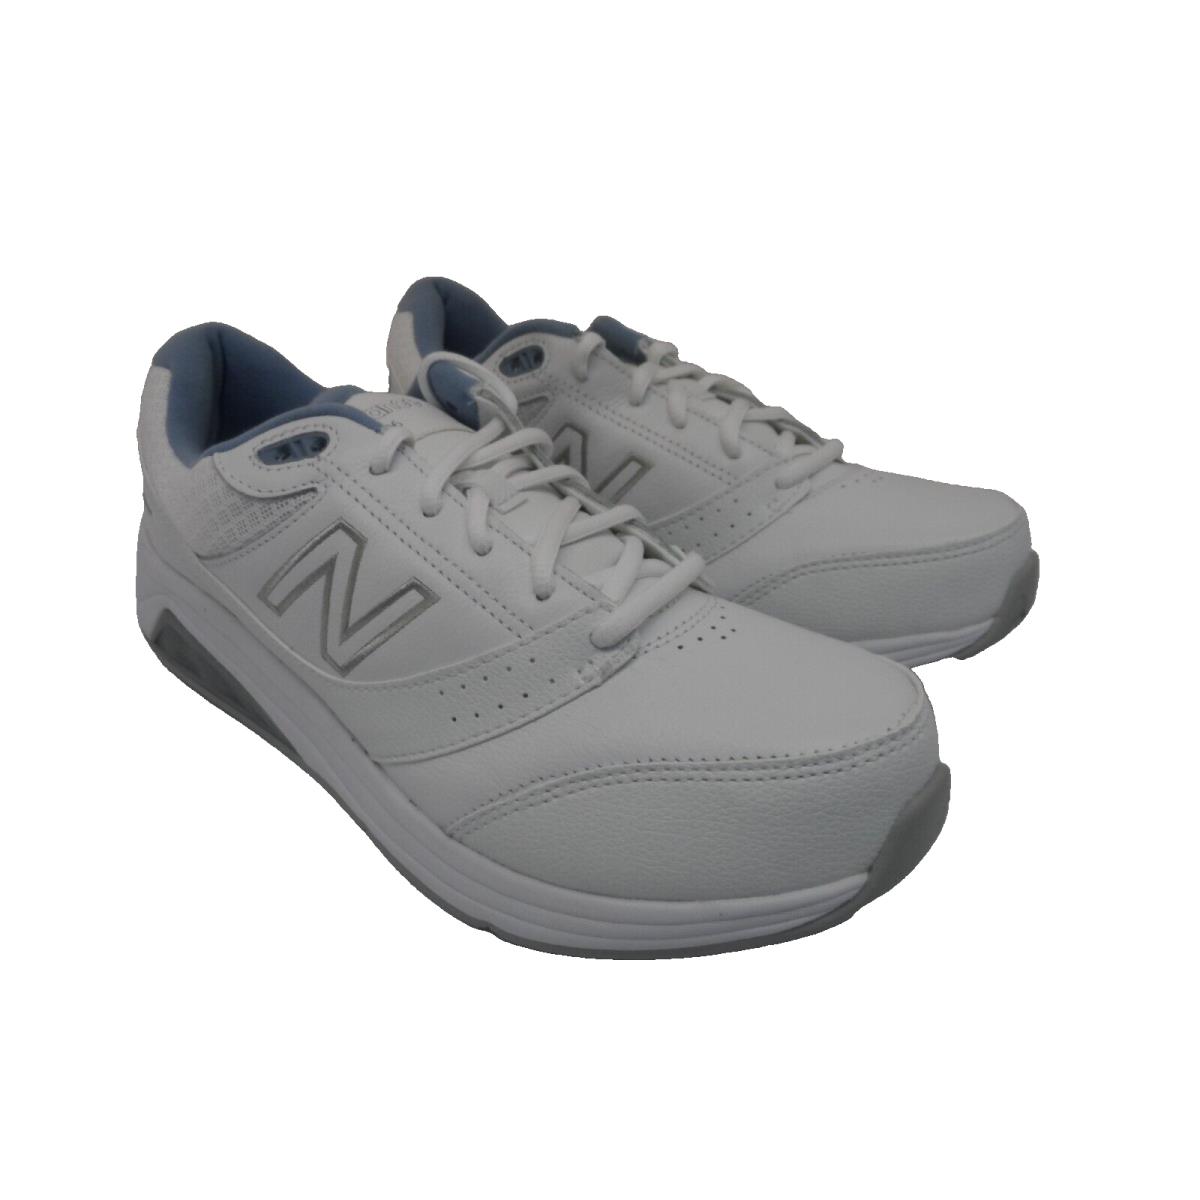 New Balance Women`s 928 V3 Lace-up Athletic Sneakers White/blue Size 5 2E - White/Blue